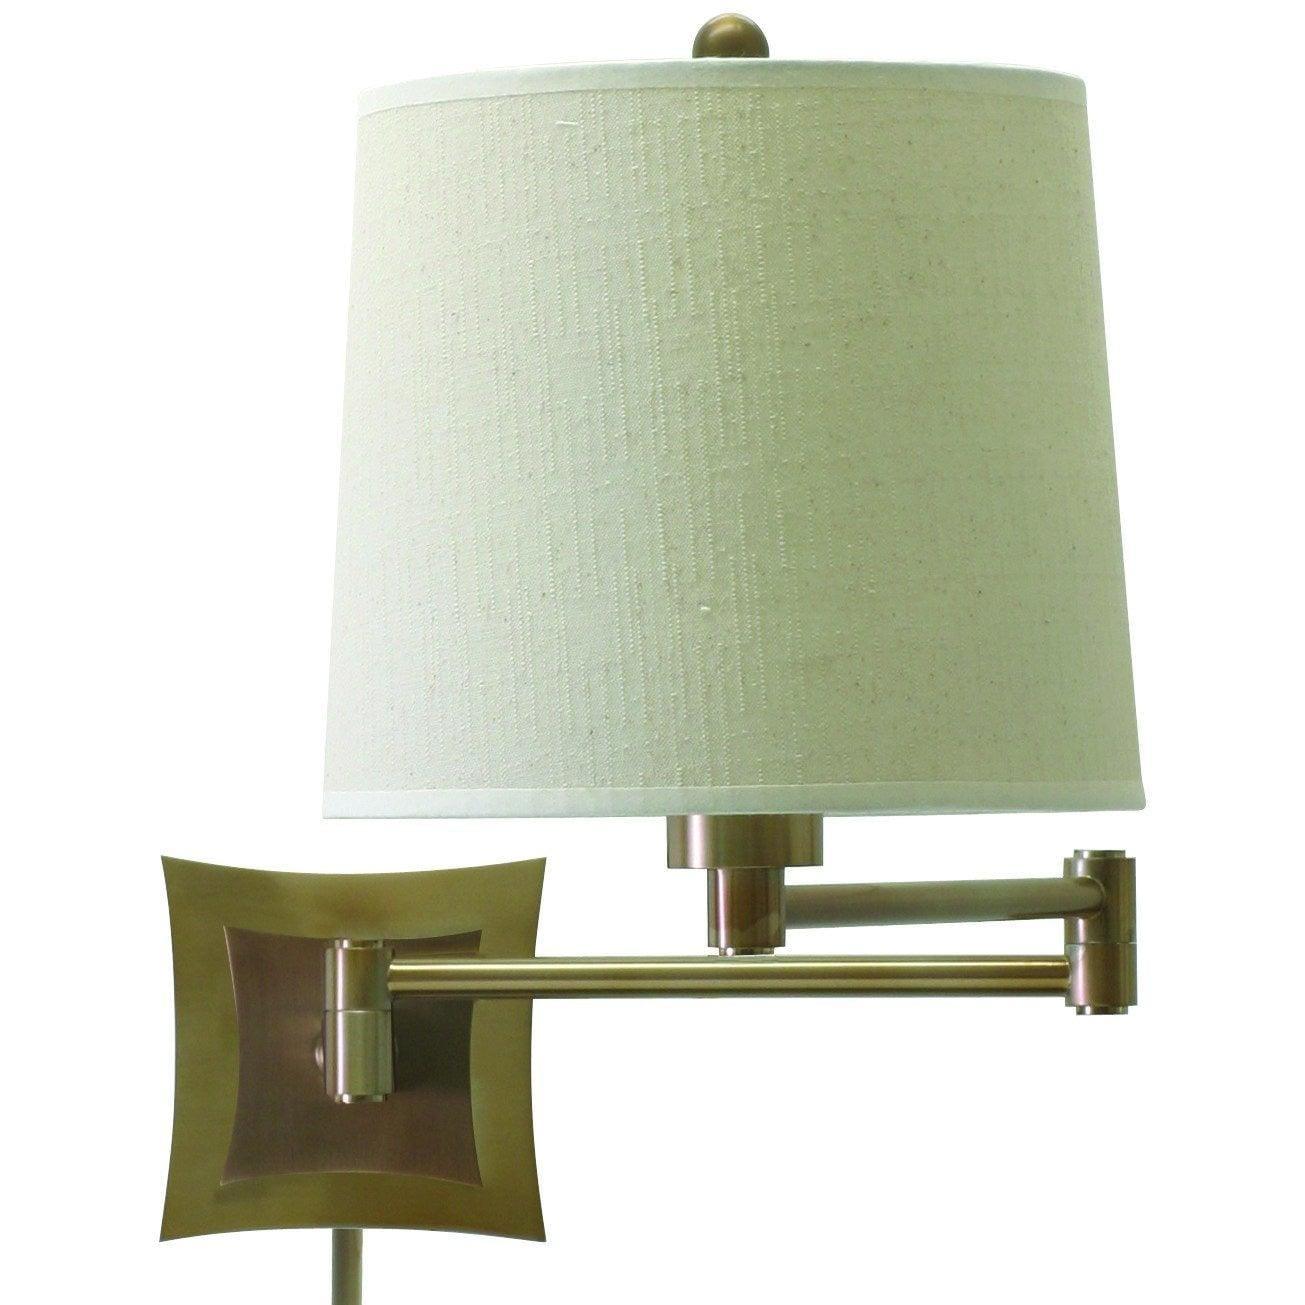 House of Troy - Decorative Wall Swing One Light Wall Sconce - WS752-AB | Montreal Lighting & Hardware